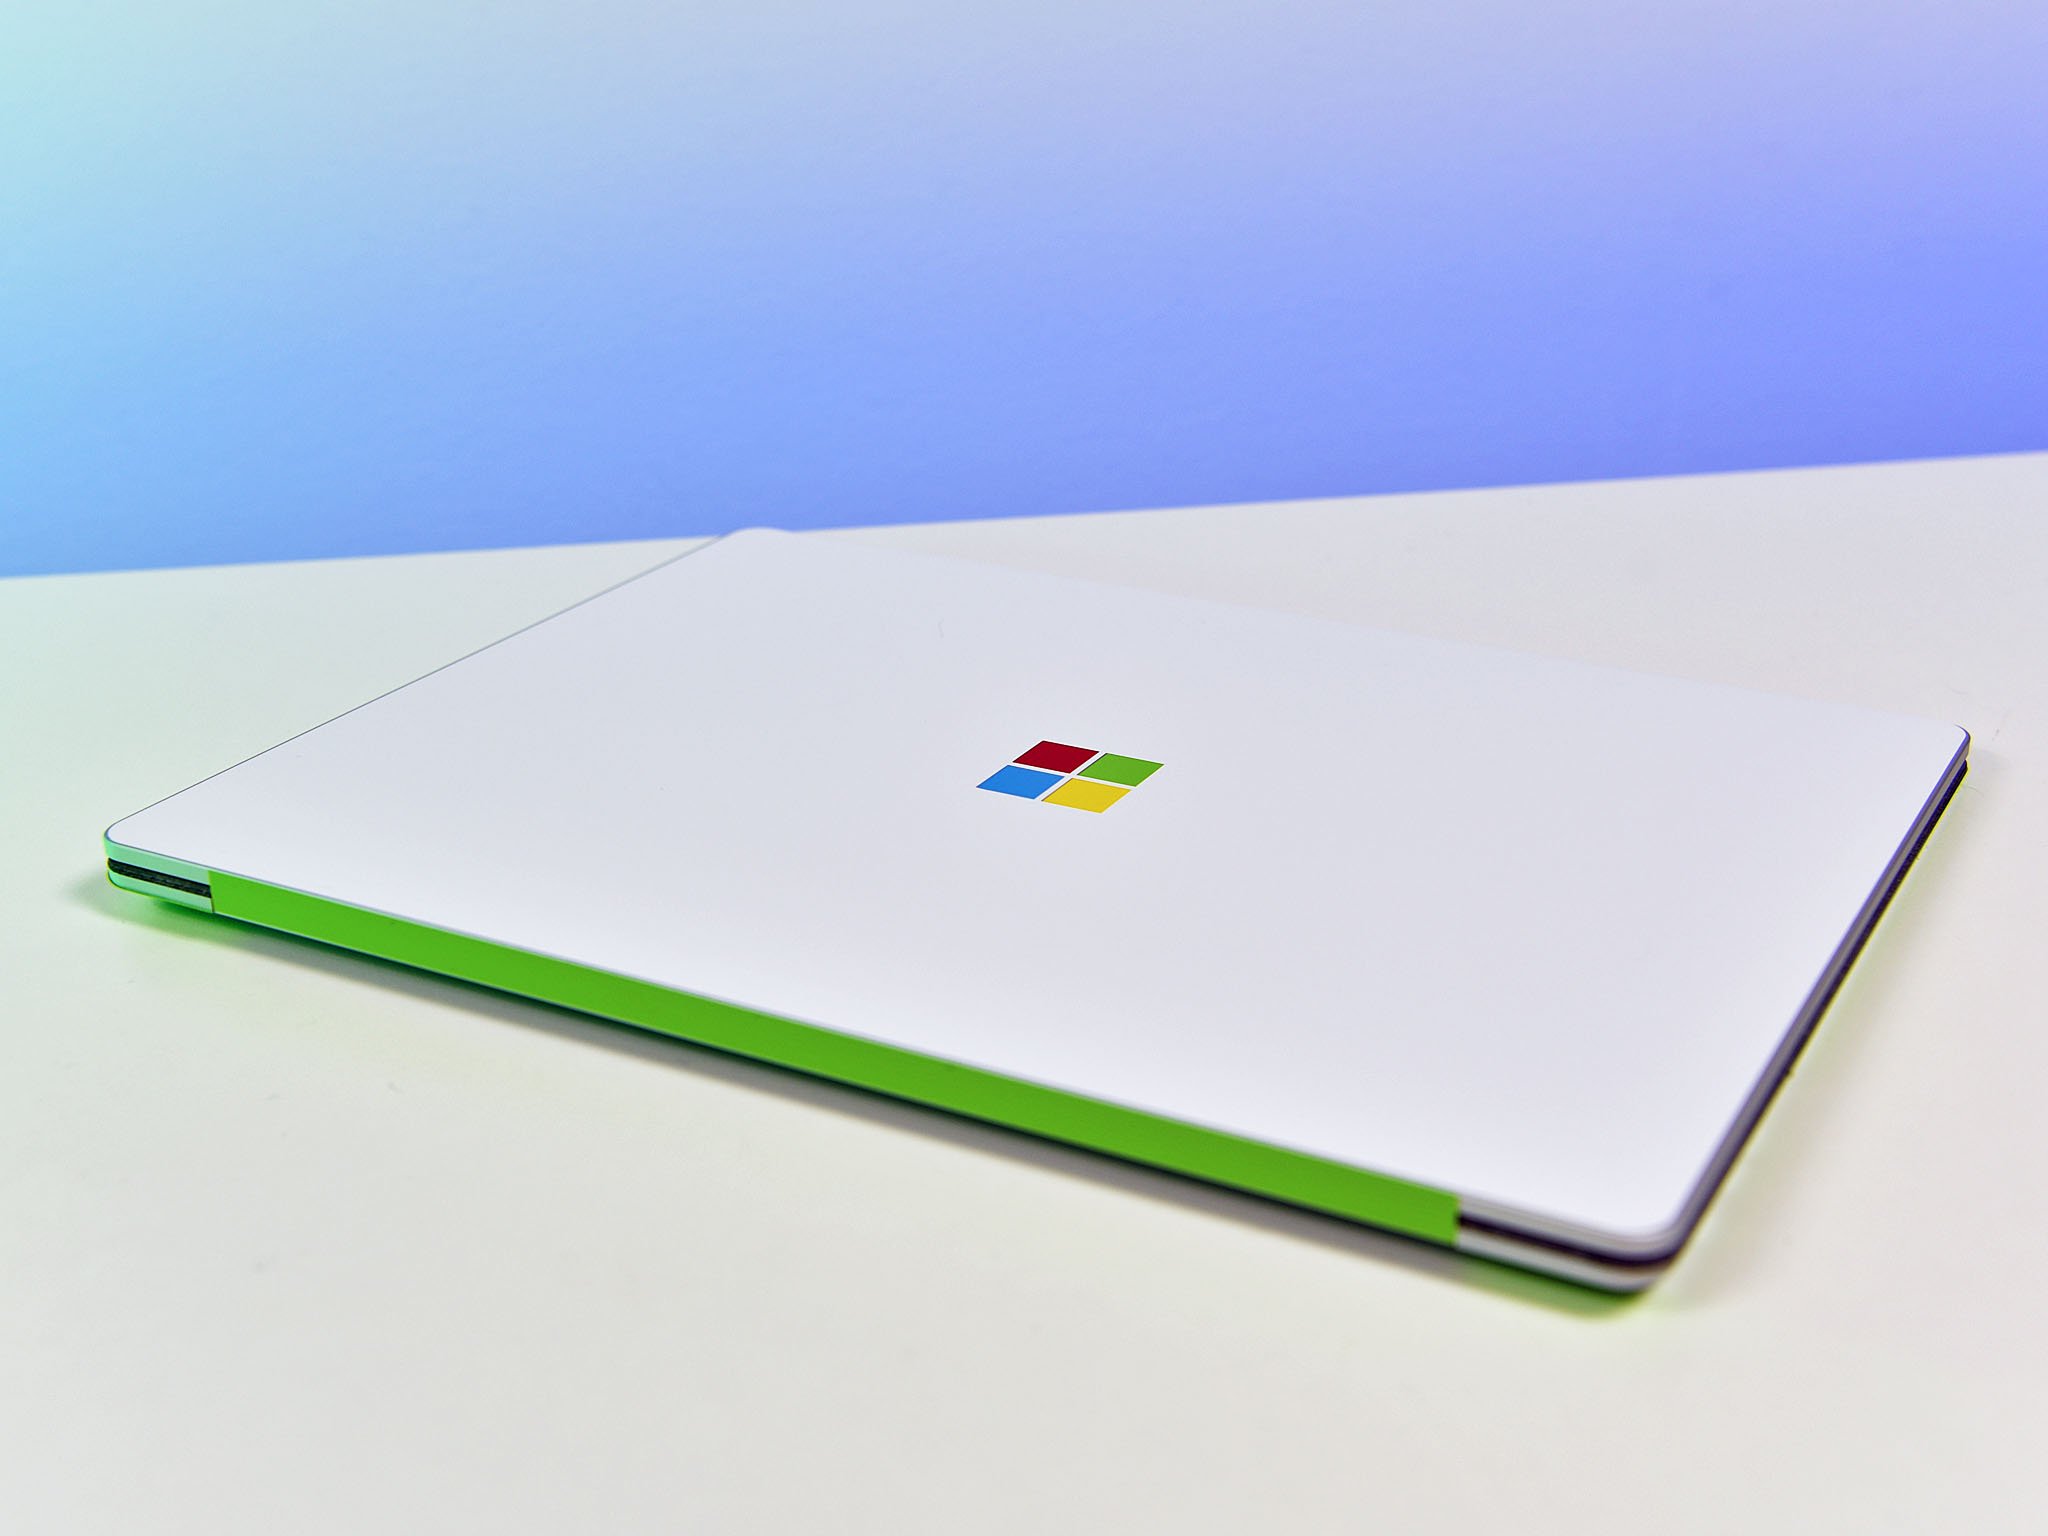 xtremeskins-for-surface-laptop-brings-a-bevy-of-color-to-protect-your